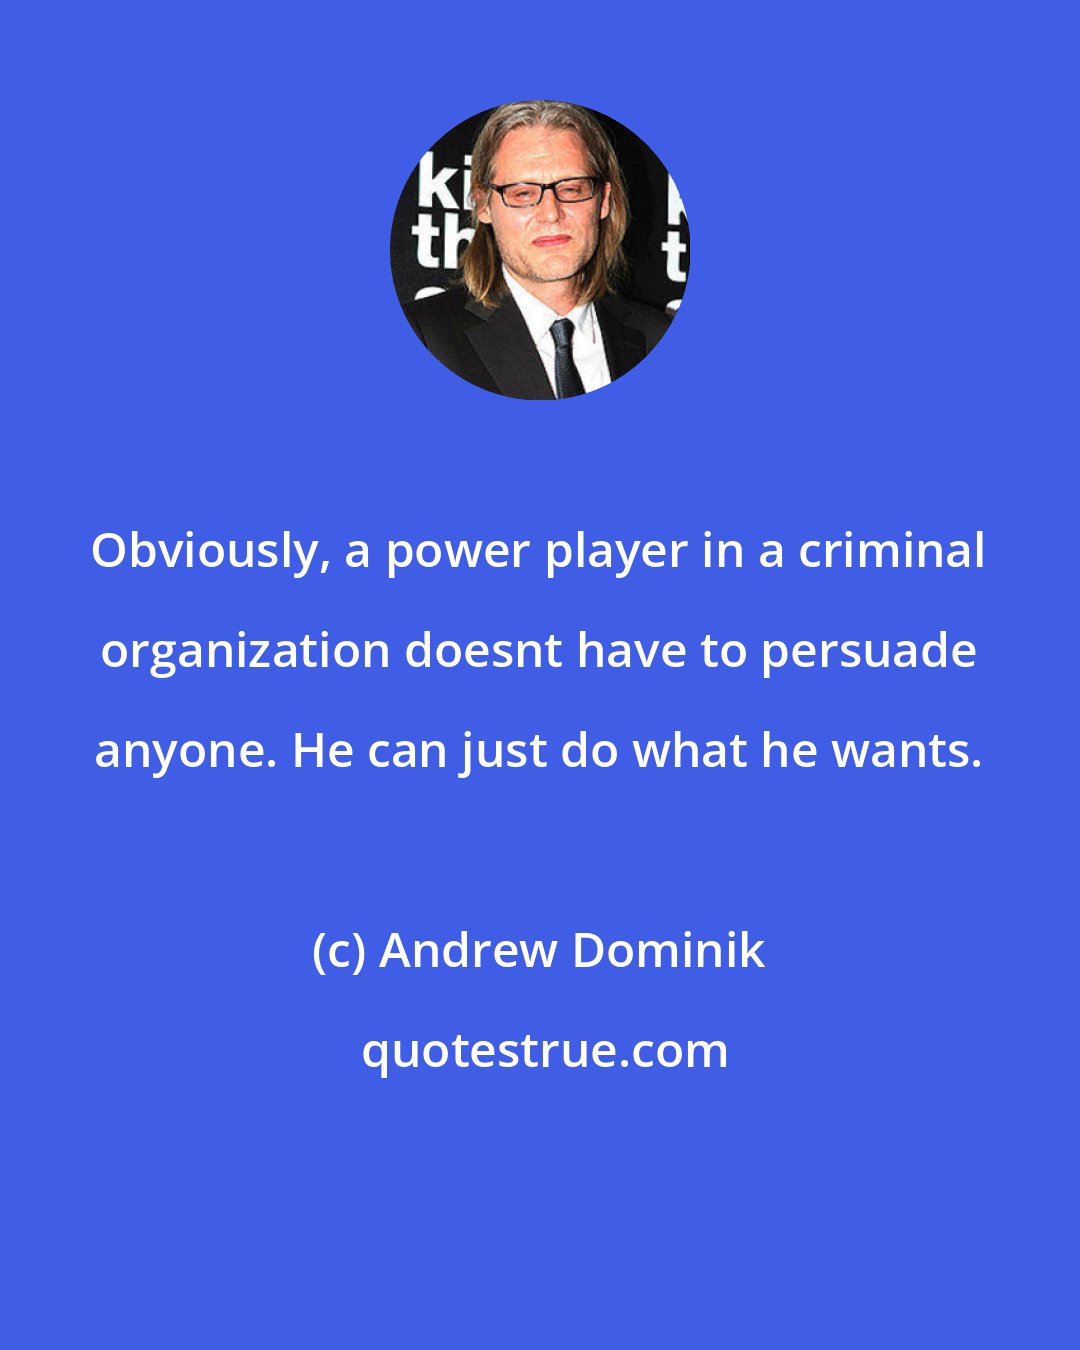 Andrew Dominik: Obviously, a power player in a criminal organization doesnt have to persuade anyone. He can just do what he wants.